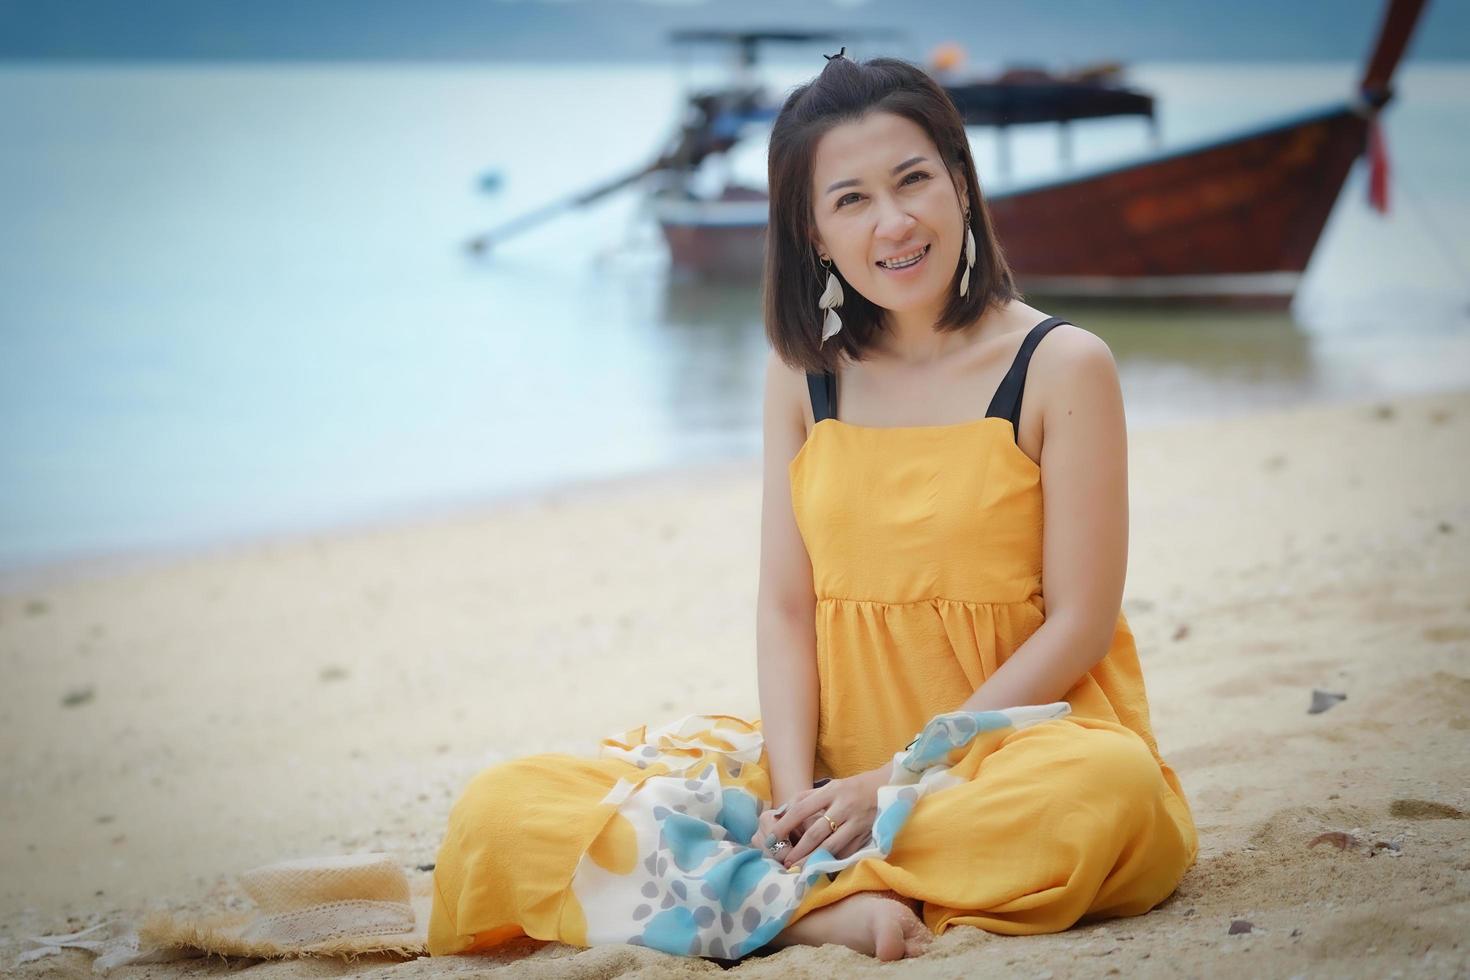 Portrait of a cute girl sitting on the beach with a blurred traditional long-tail boat in the background photo